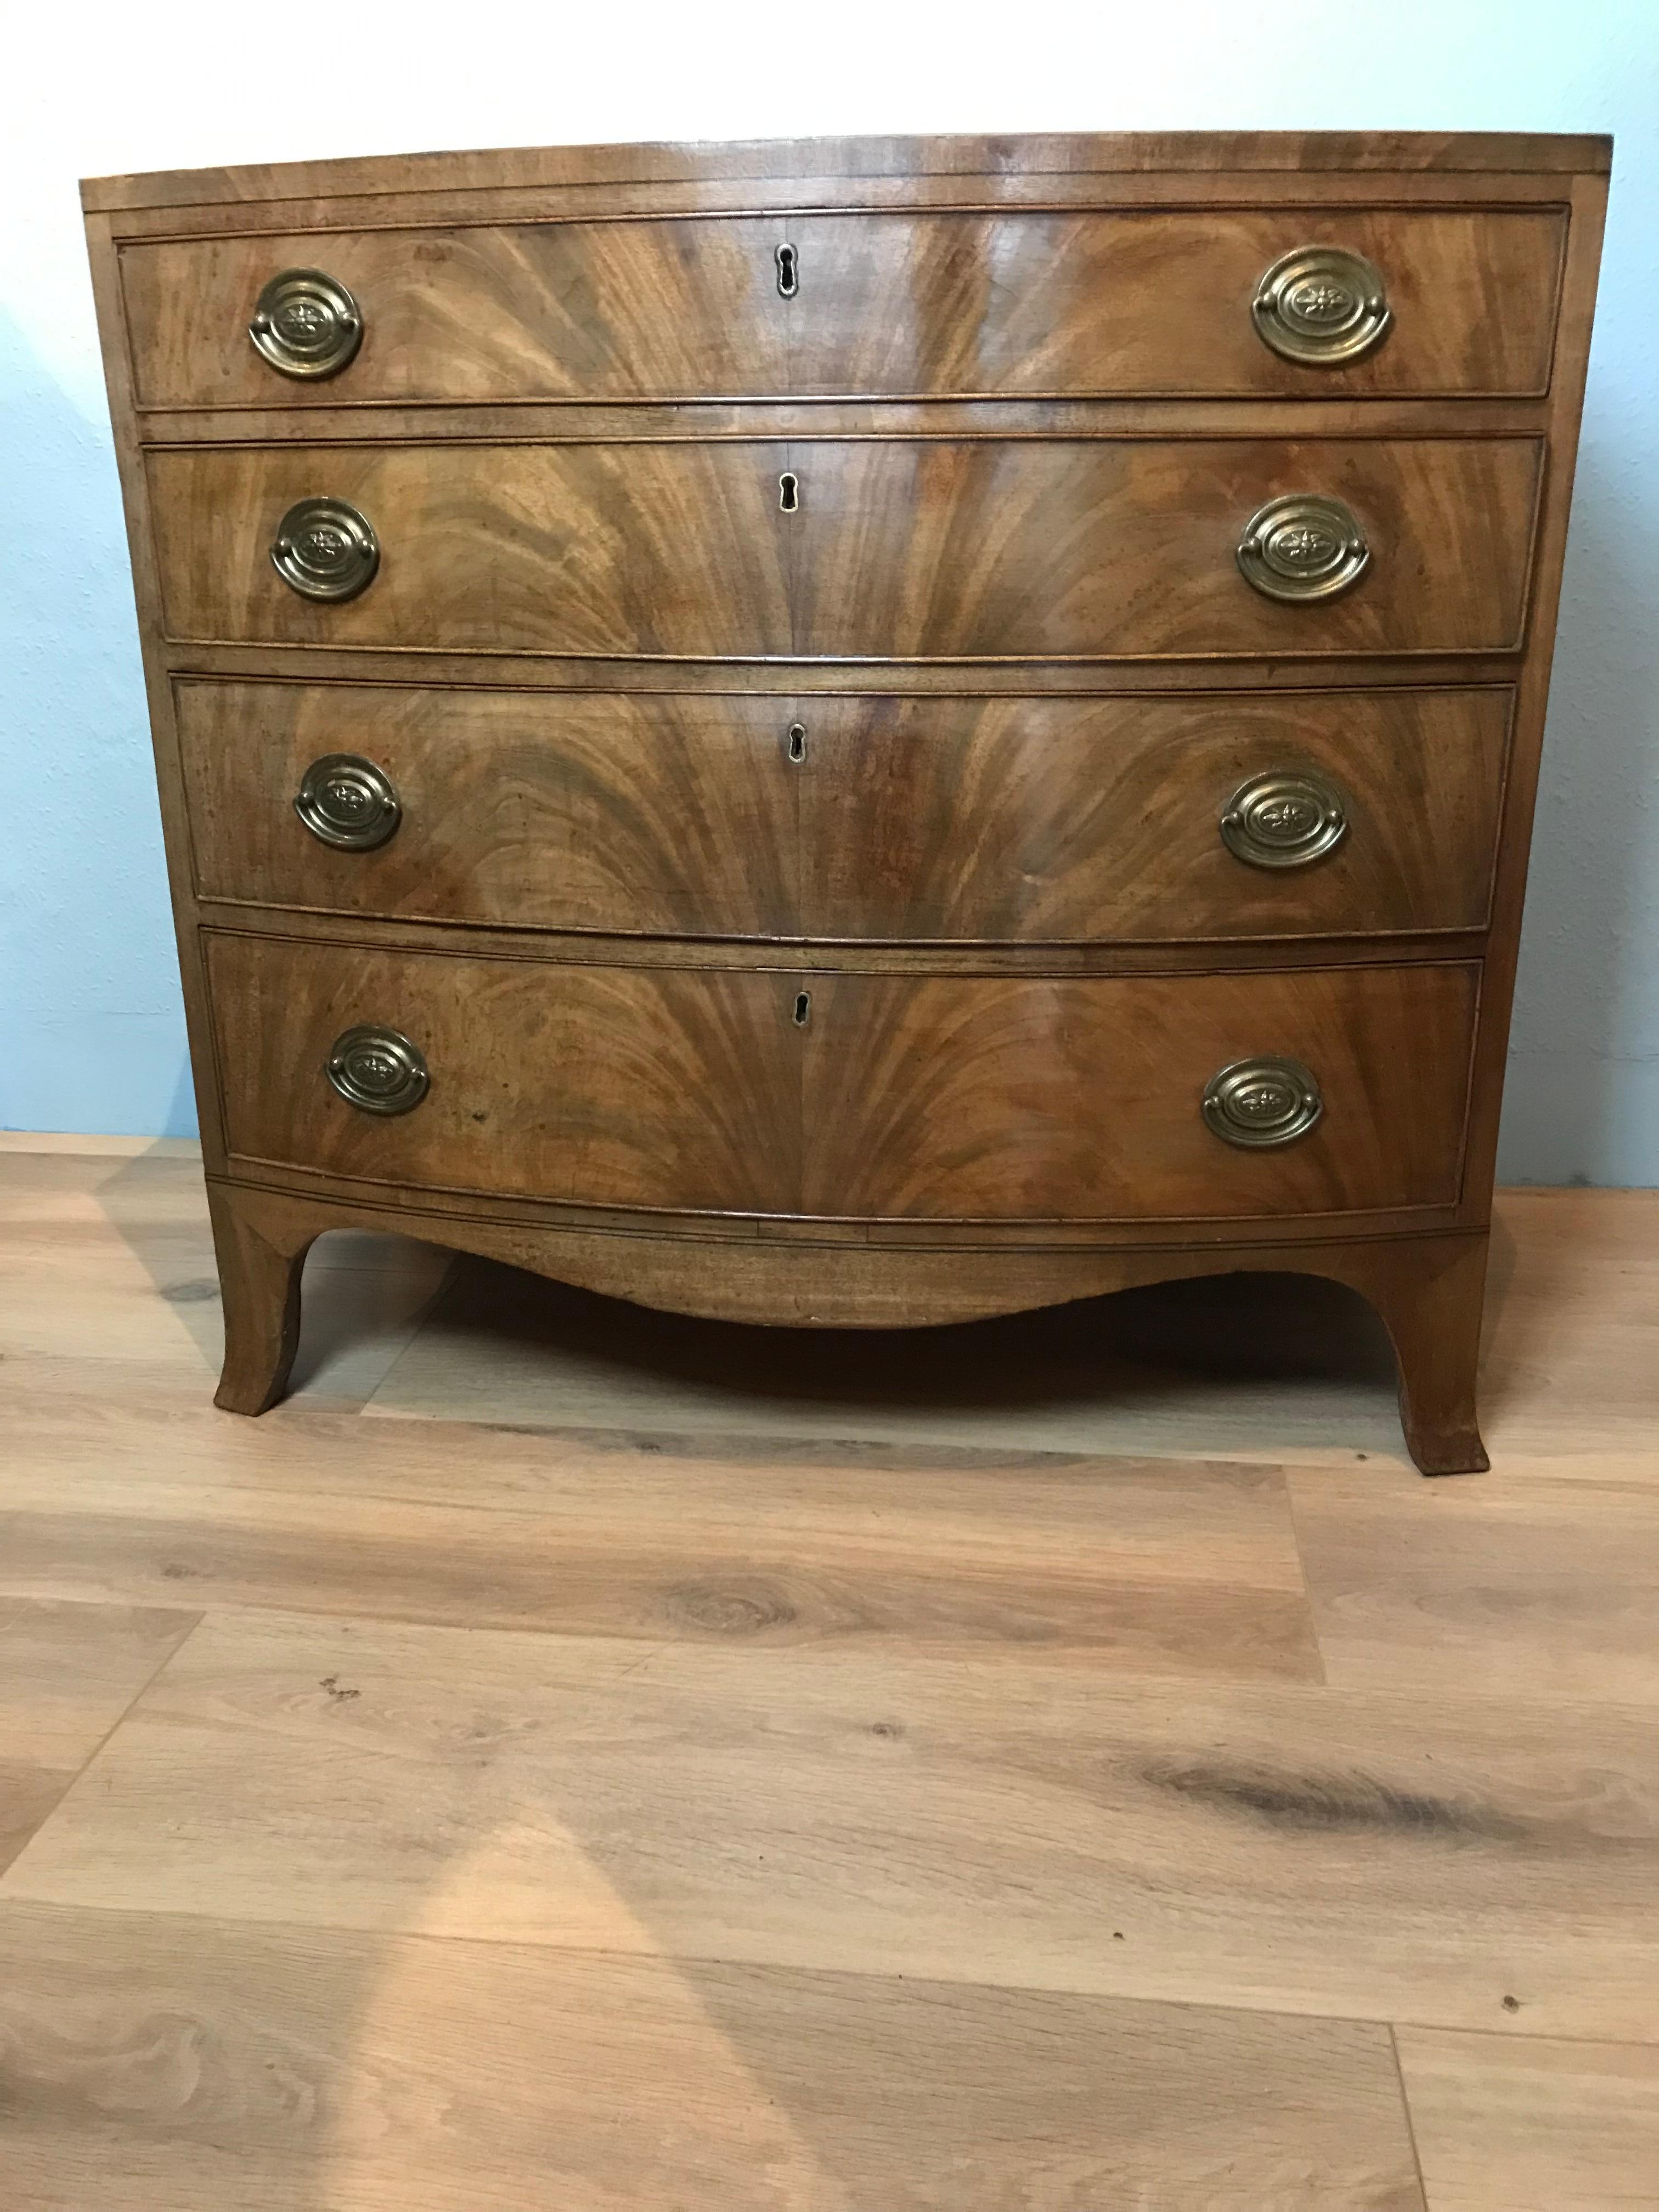 This Georgian mahogany English bow front chest of drawers has a wonderful light honey colour with book matched flame veneers to the drawer fronts. The top has an attractive cross-banding and cockbeading around each drawer. This low waisted chest of